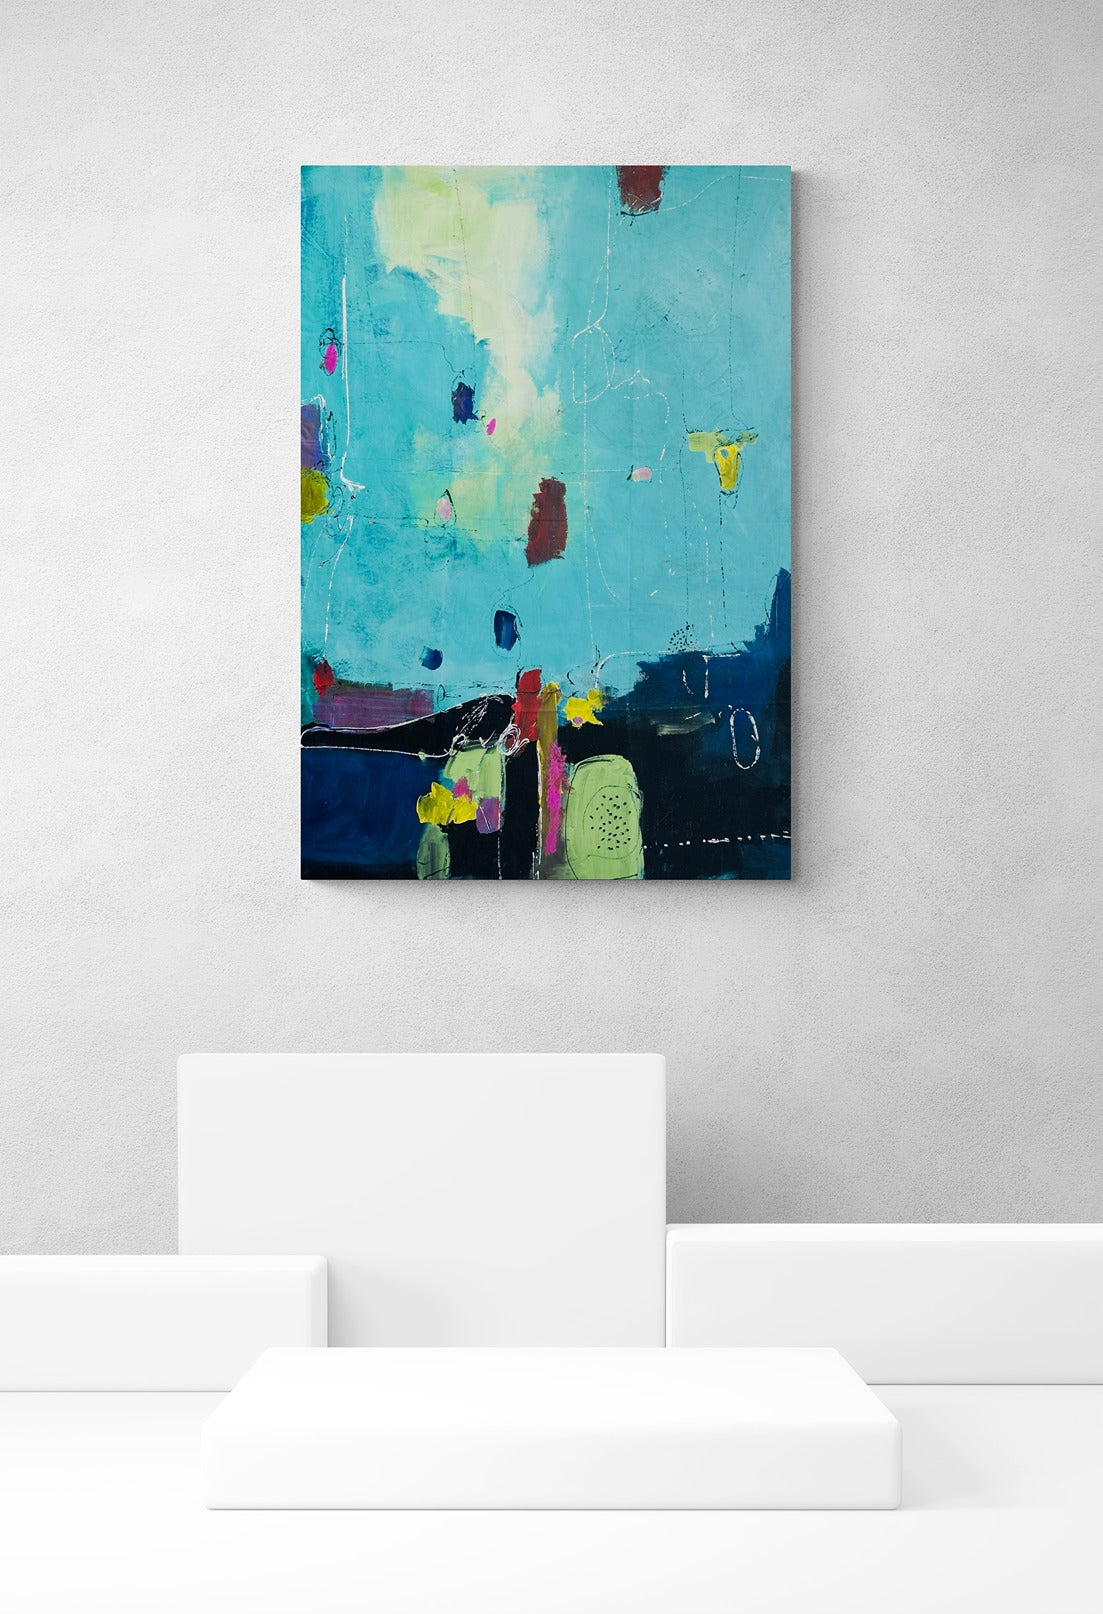 Large original hand-painted canvas abstract wall art in a minimal interior adorned with geometric shapes, adding artistic depth to the contemporary space.